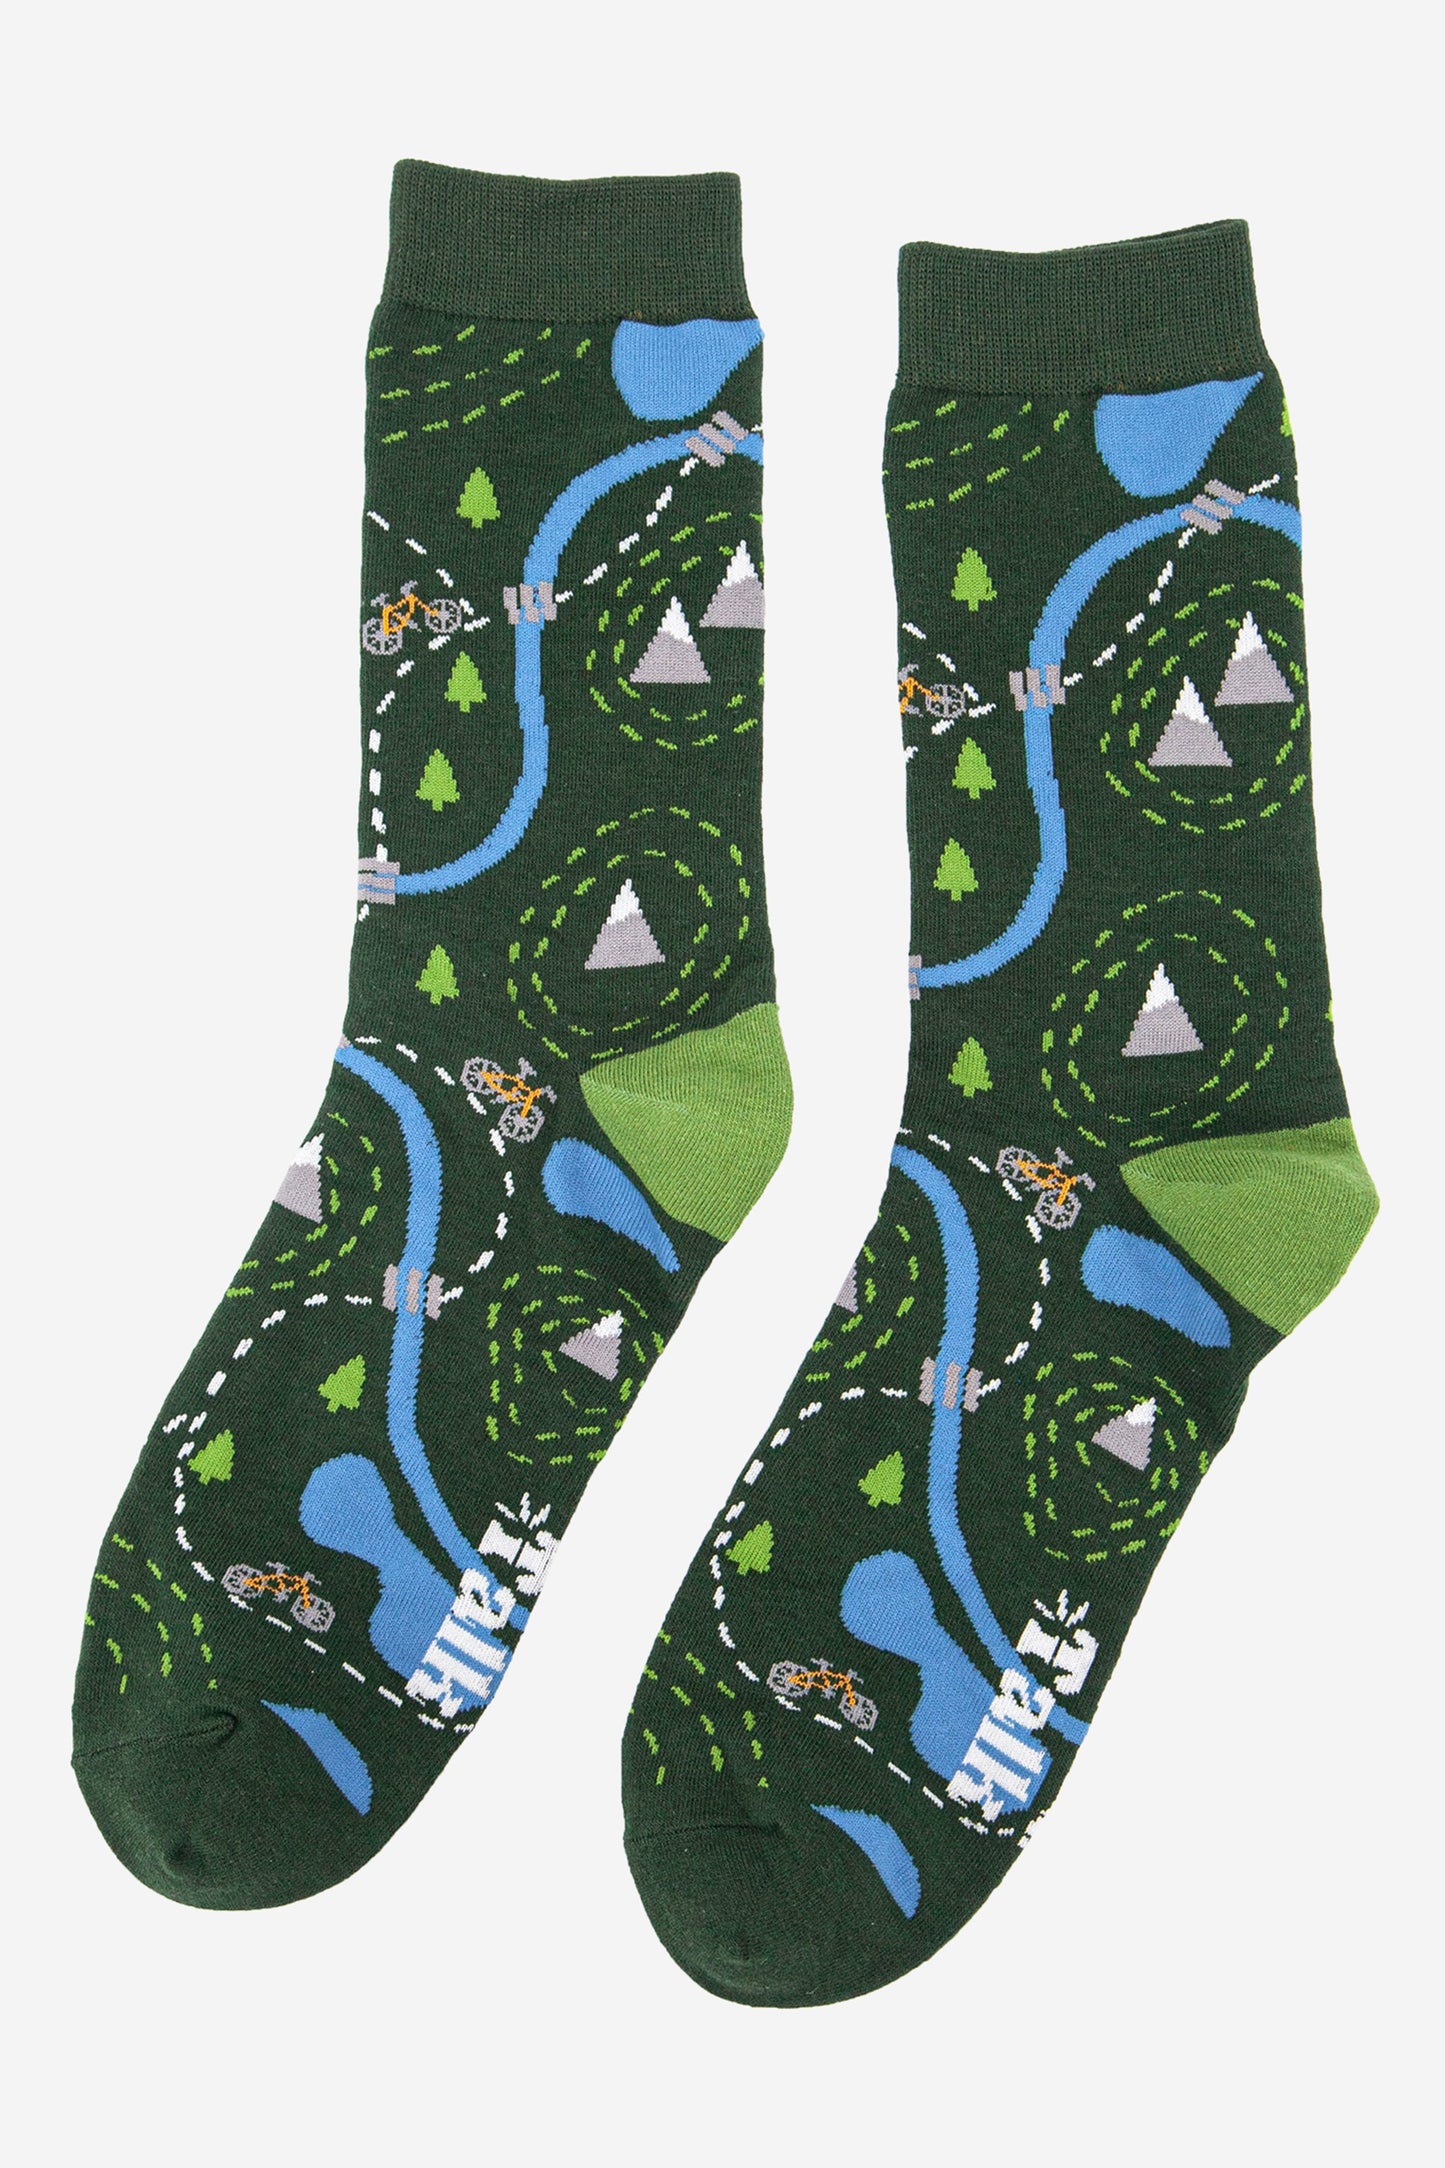 mens mountain bike themed bamboo socks, designed to look like a biking trail these bamboo socks also feature lakes, mountains and rivers